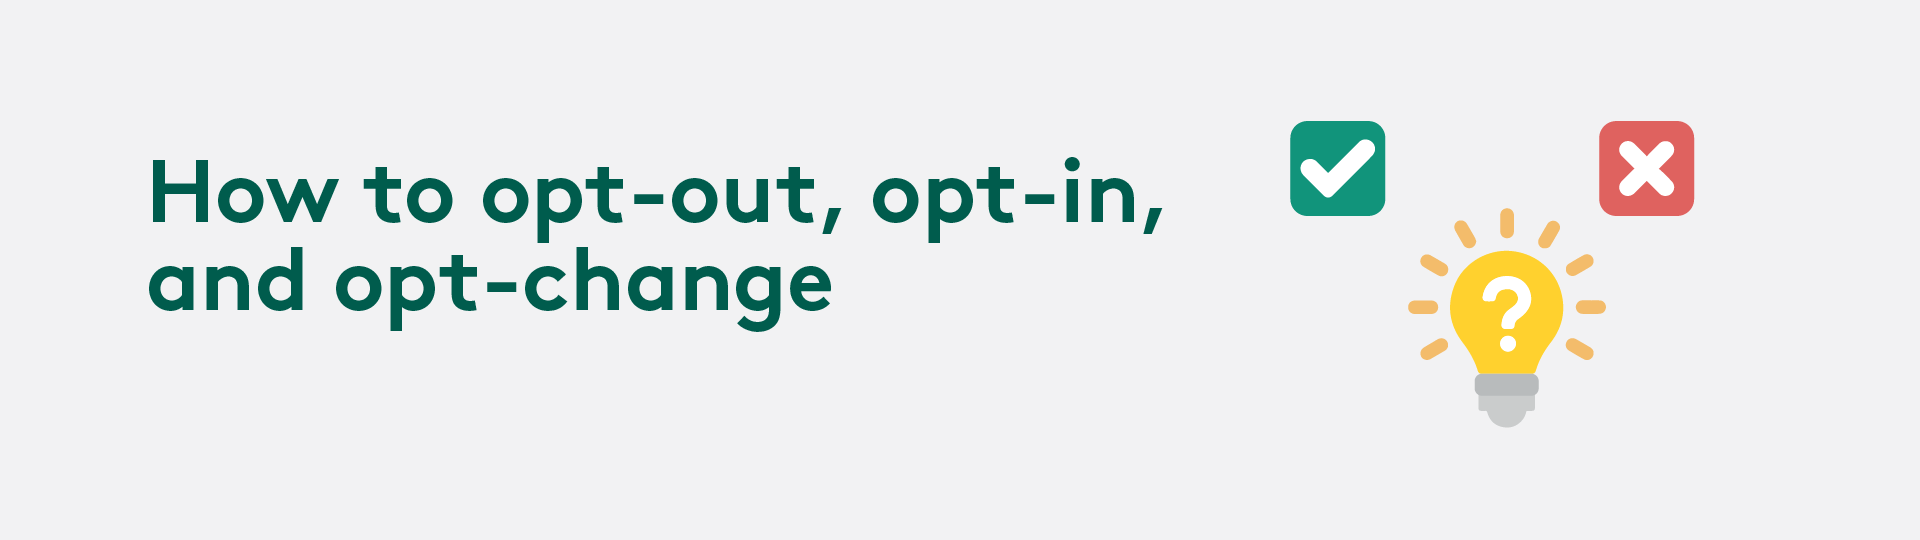 How to opt-out, opt-in, and opt-change